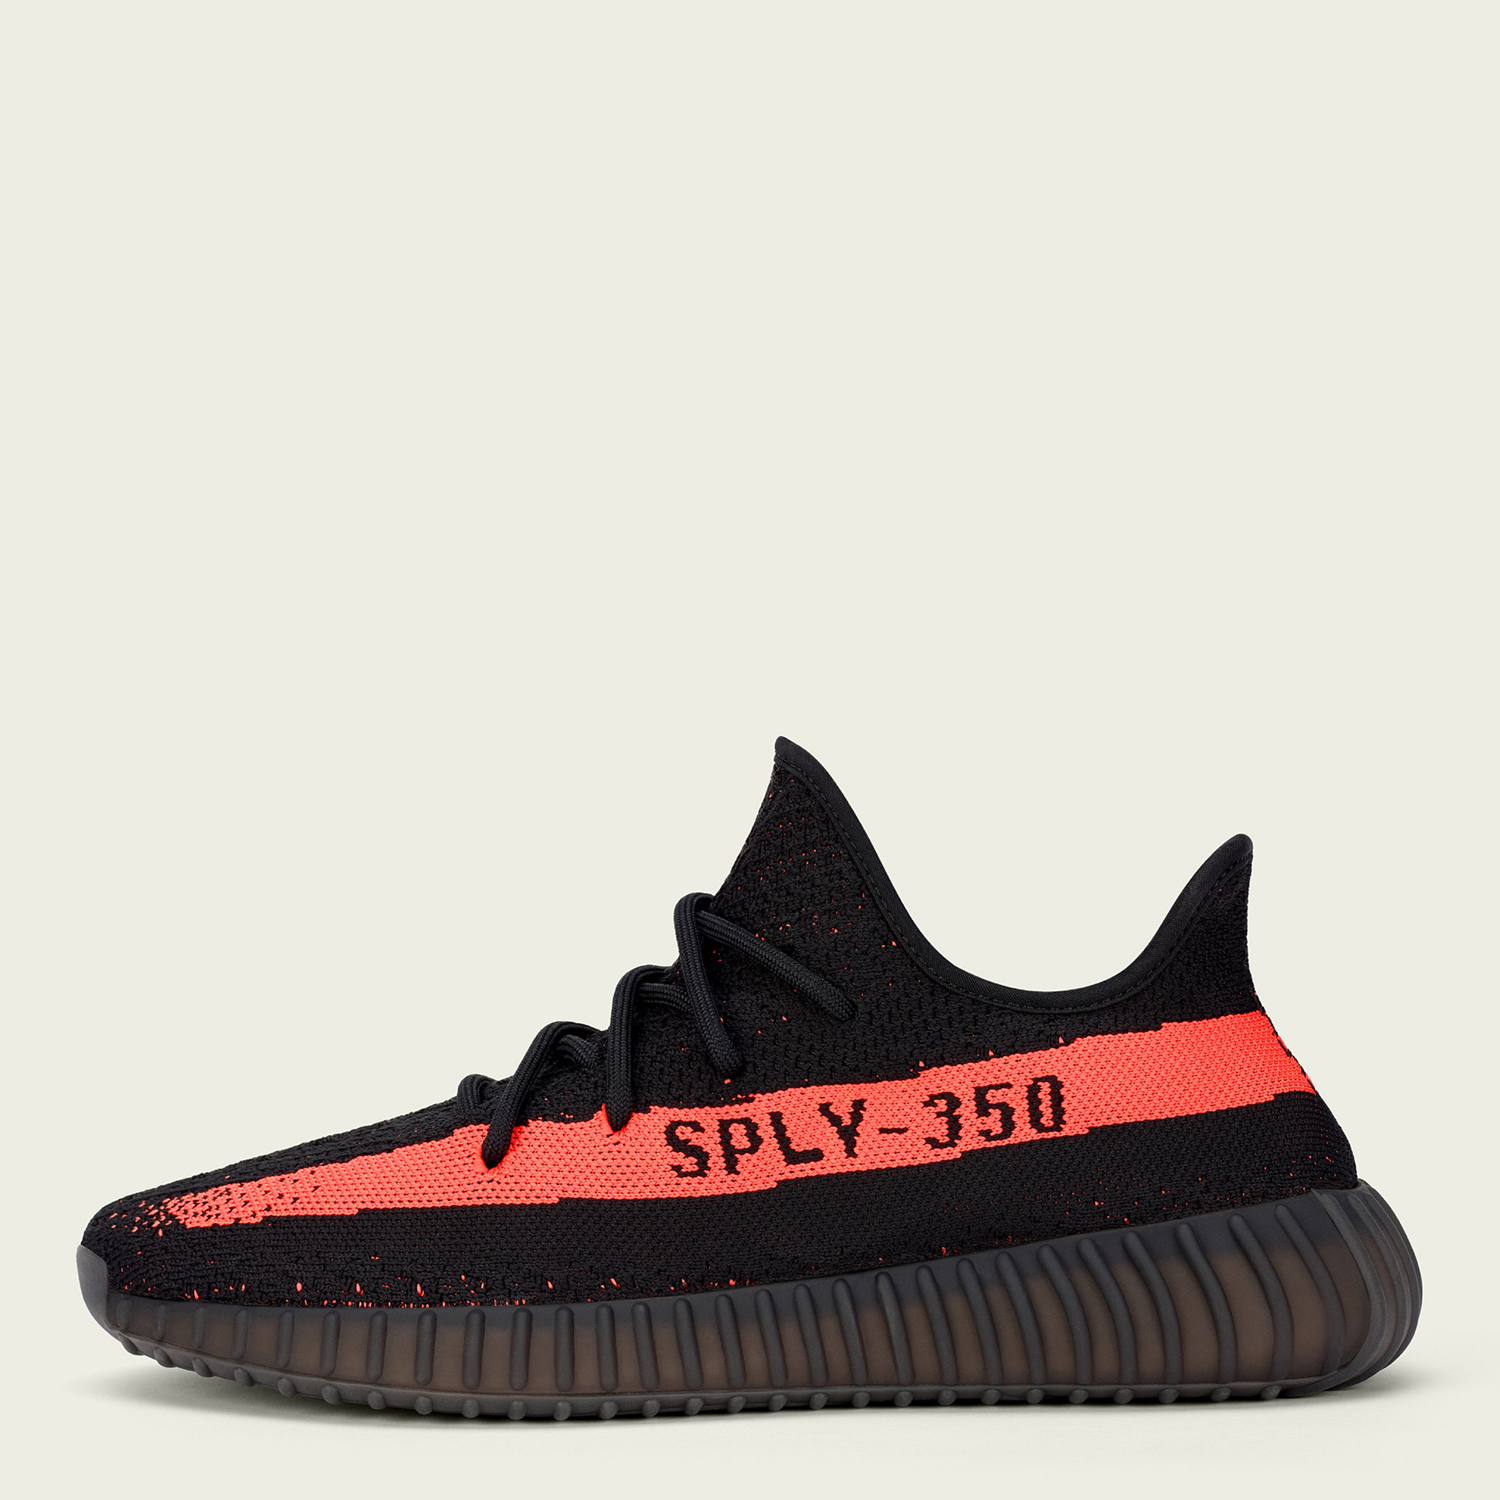 Yeezy Boost 350 V2 Core Black Red [2]